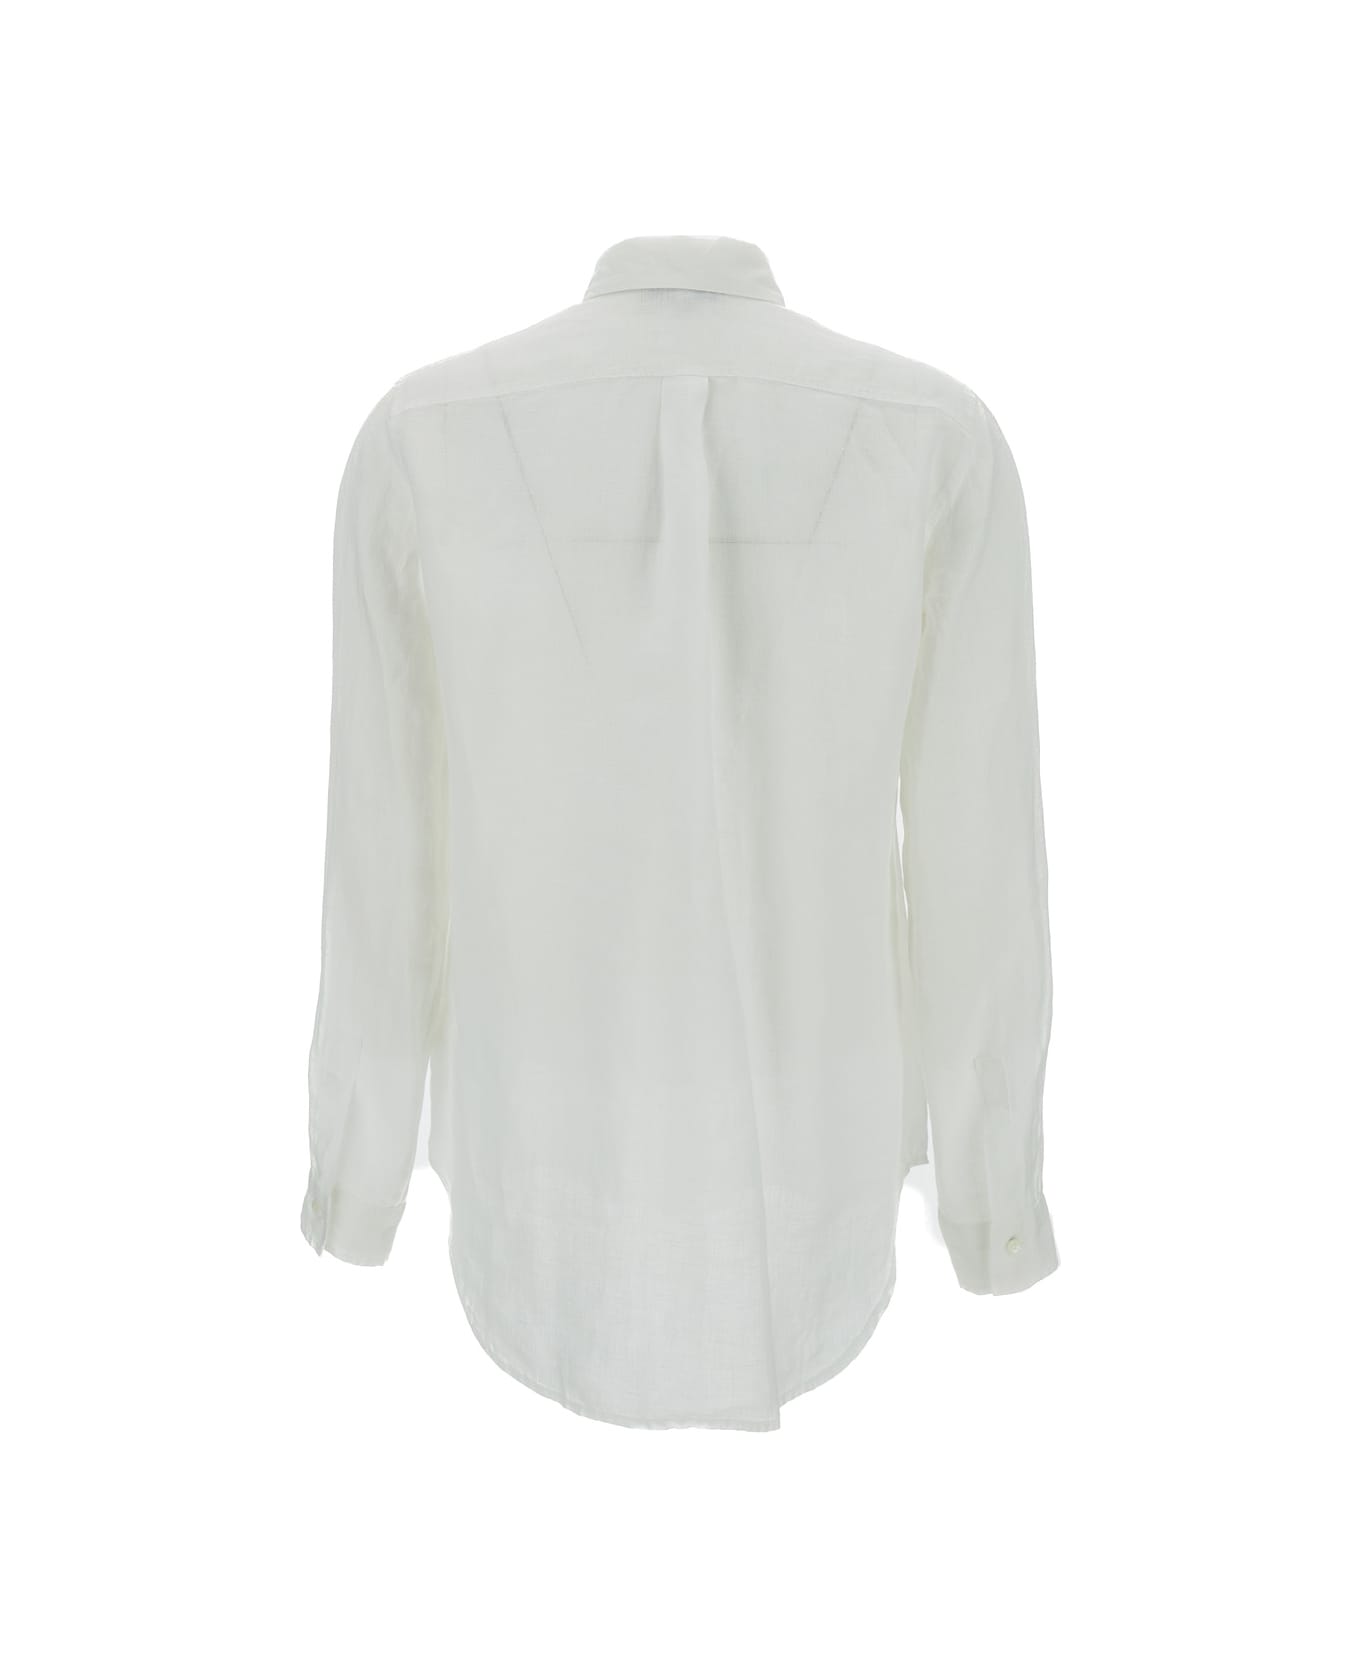 Antonelli White Shirt With Patch Pocket In Linen Woman - White シャツ